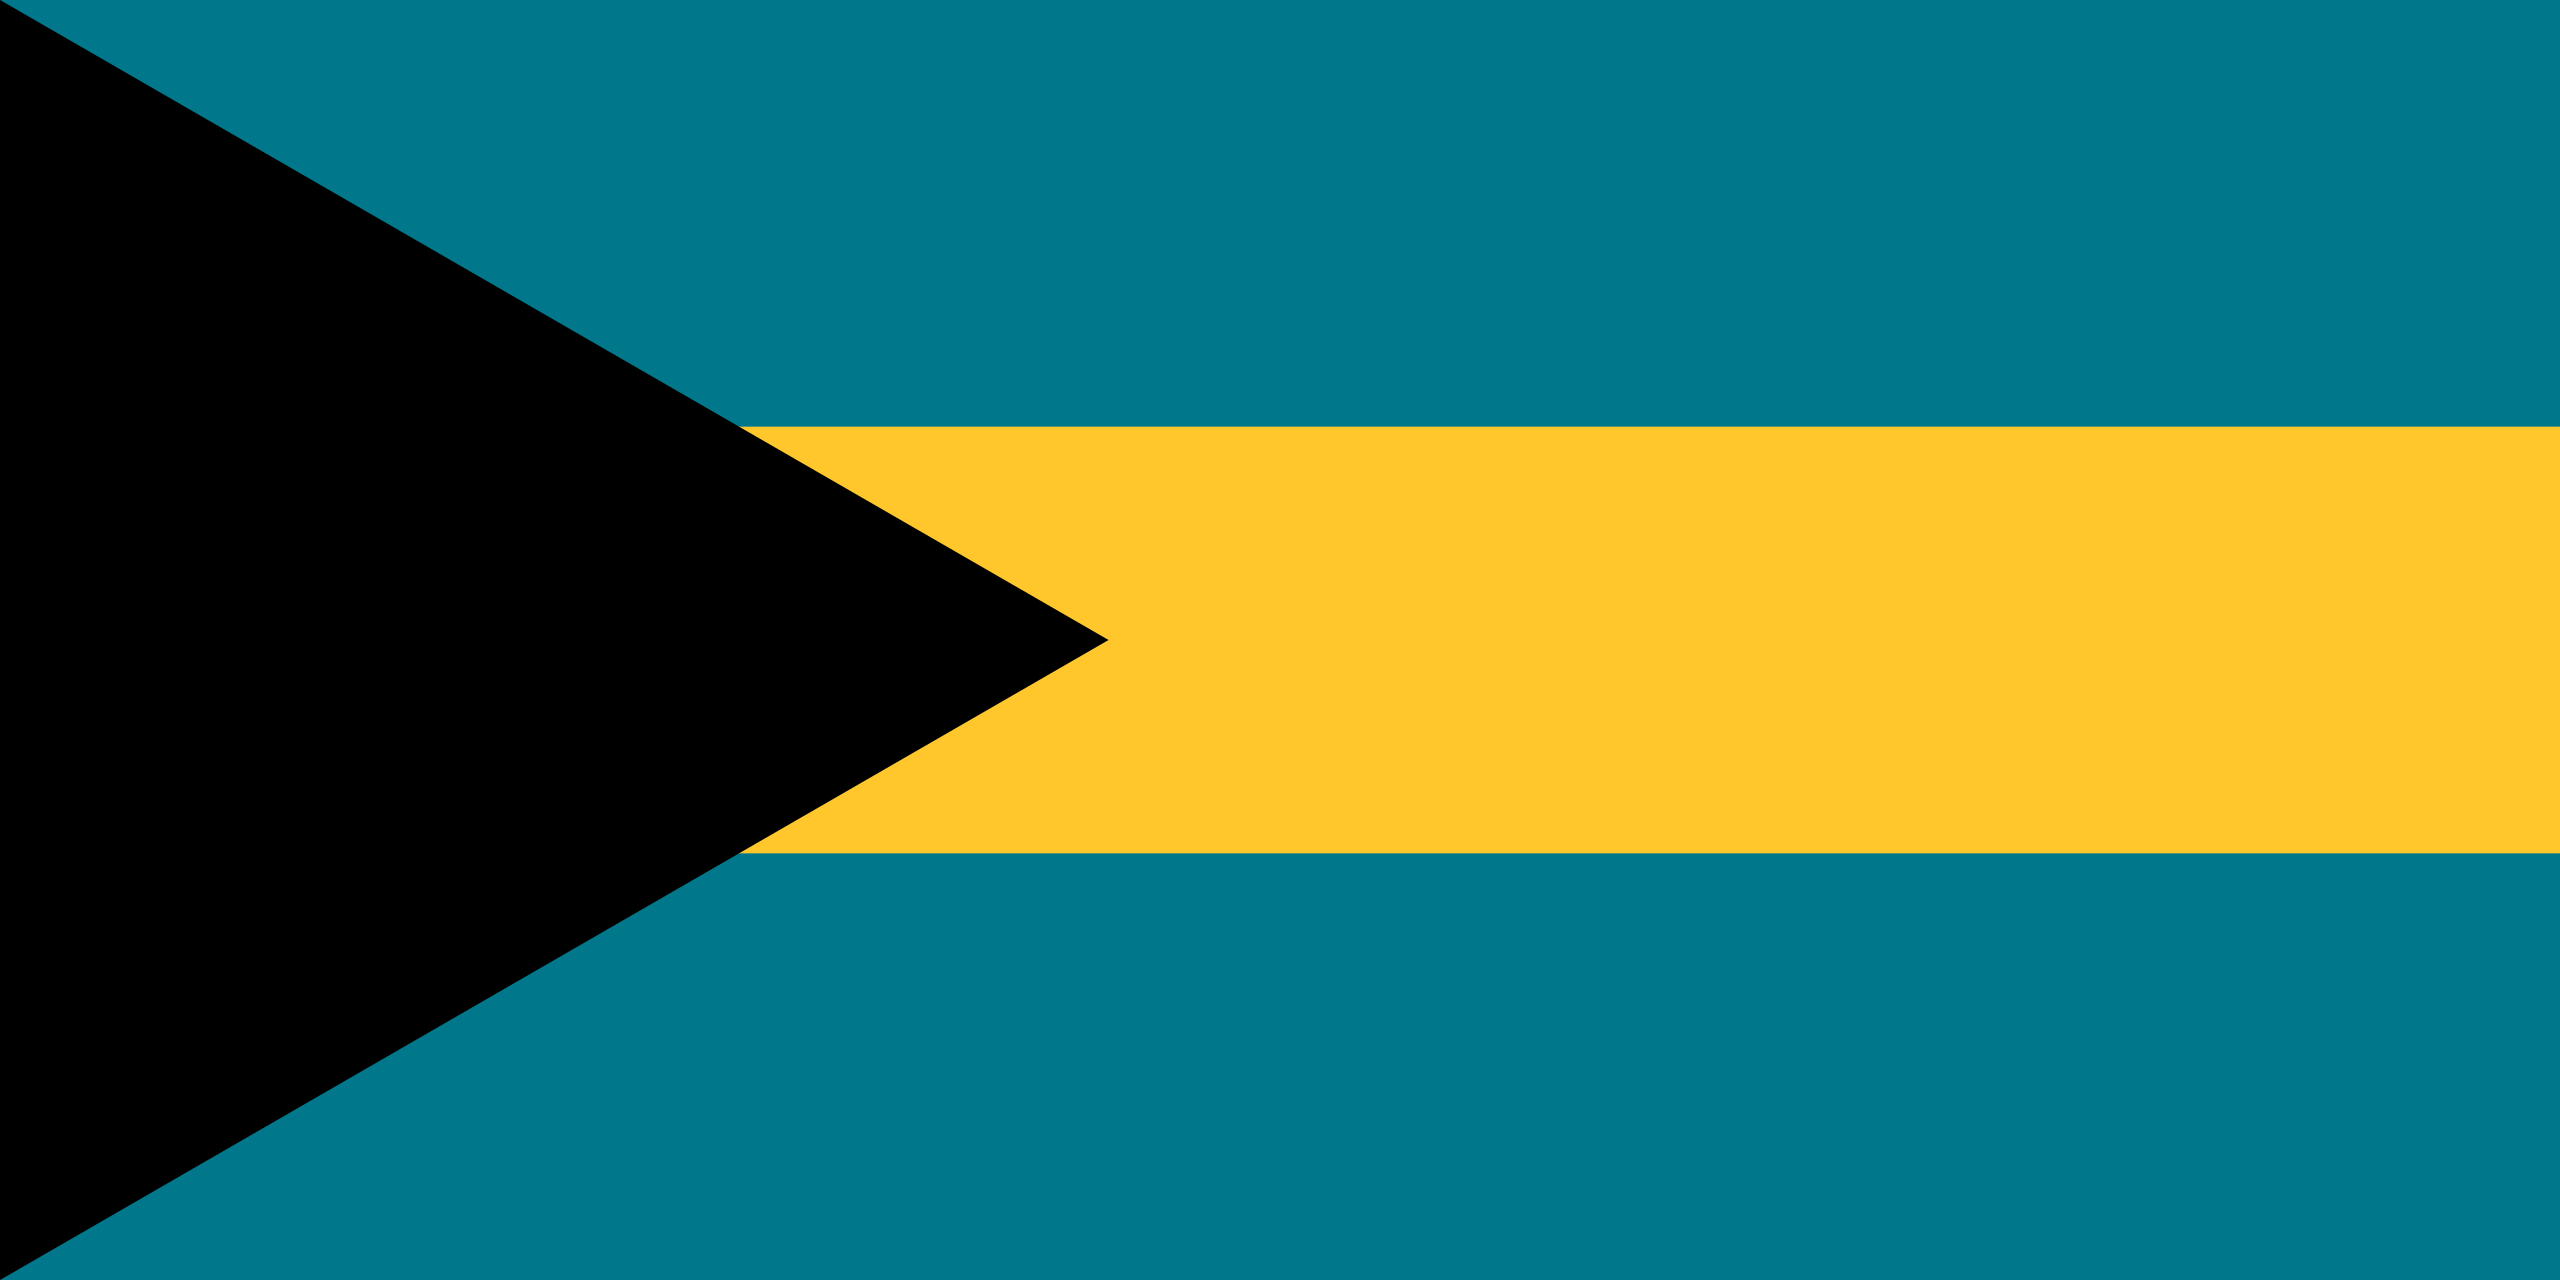 File:Flag of the Bahamas.svg - Wikimedia Commons